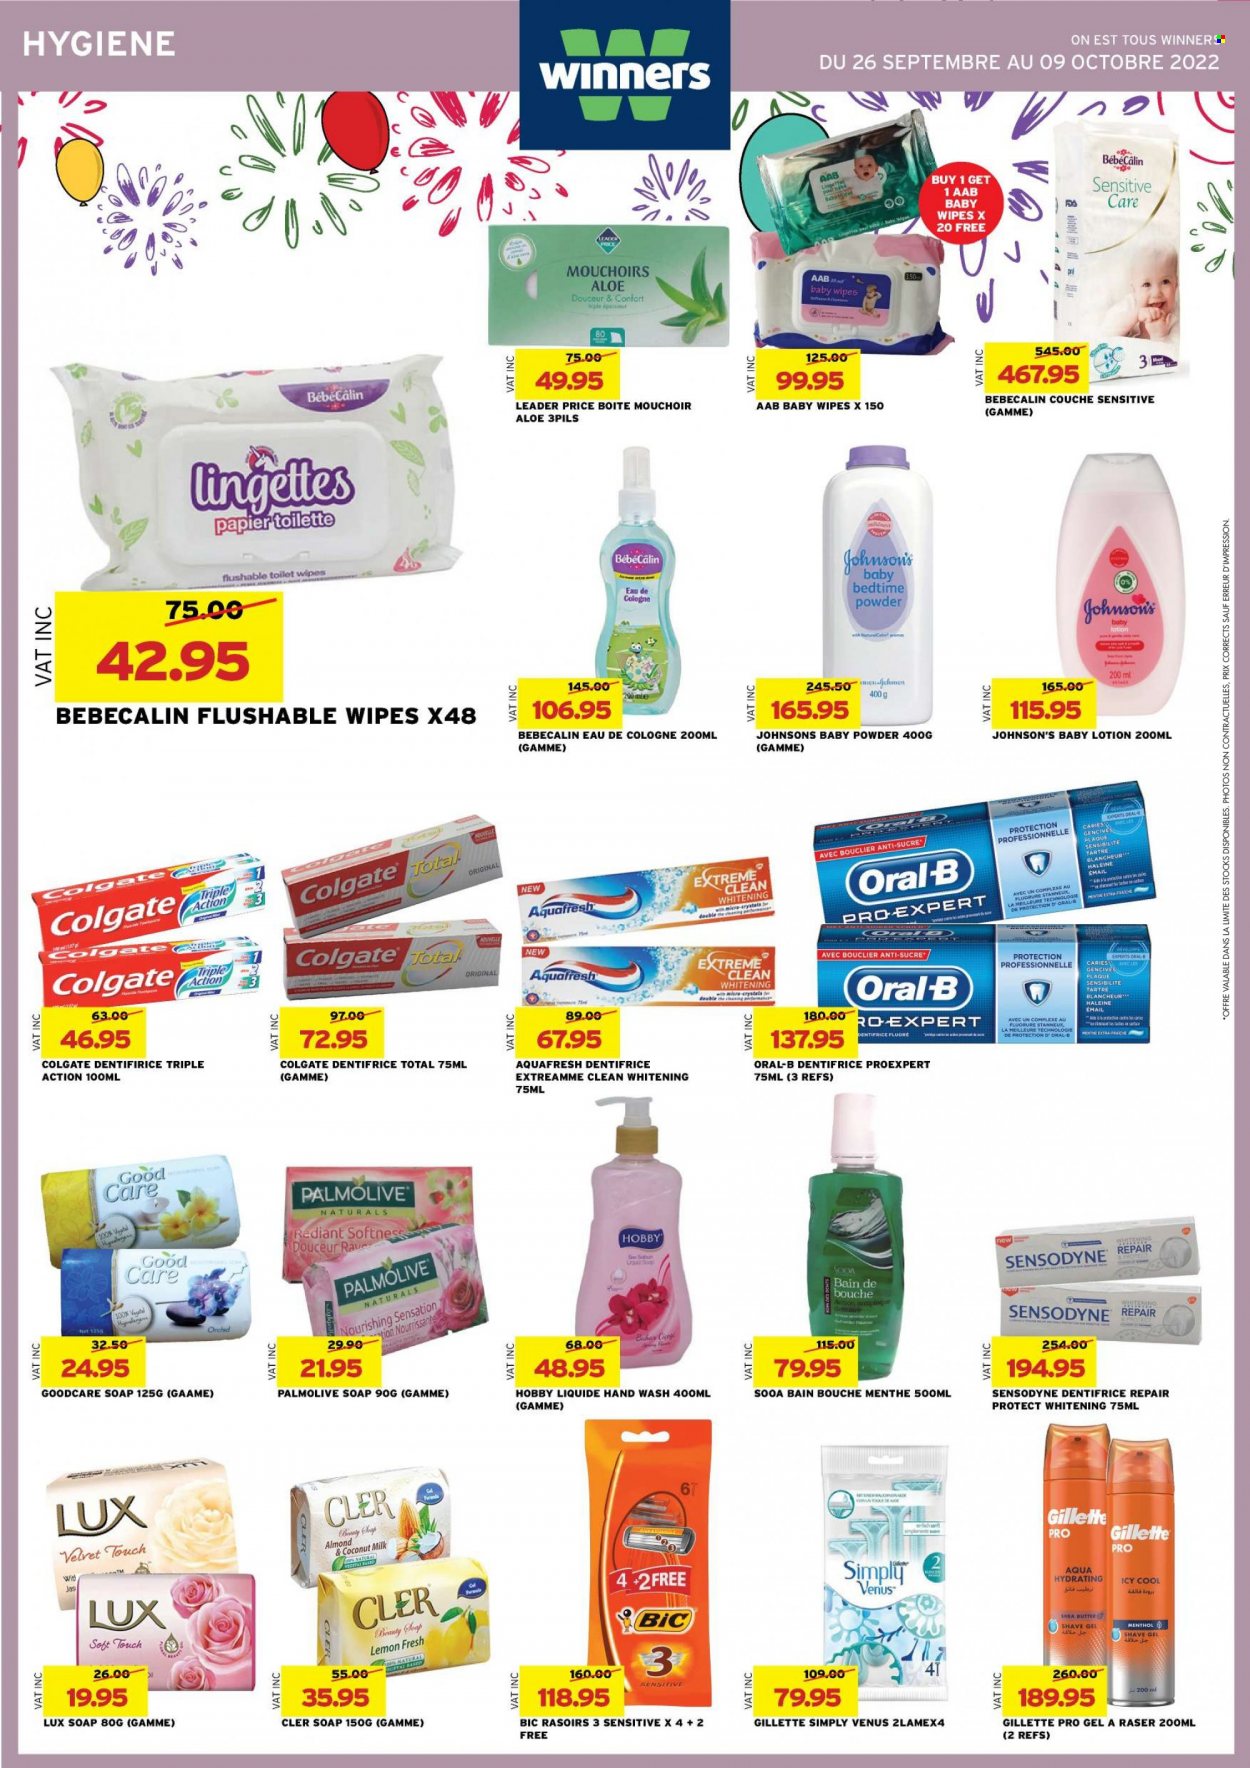 thumbnail - Winner's Catalogue - 26.09.2022 - 9.10.2022 - Sales products - butter, coconut milk, wipes, baby wipes, Johnson's, baby powder, Lux, hand soap, hand wash, Palmolive, soap, Gillette, body lotion, cologne, BIC, shave gel, Venus, Colgate, Oral-B, Sensodyne. Page 38.